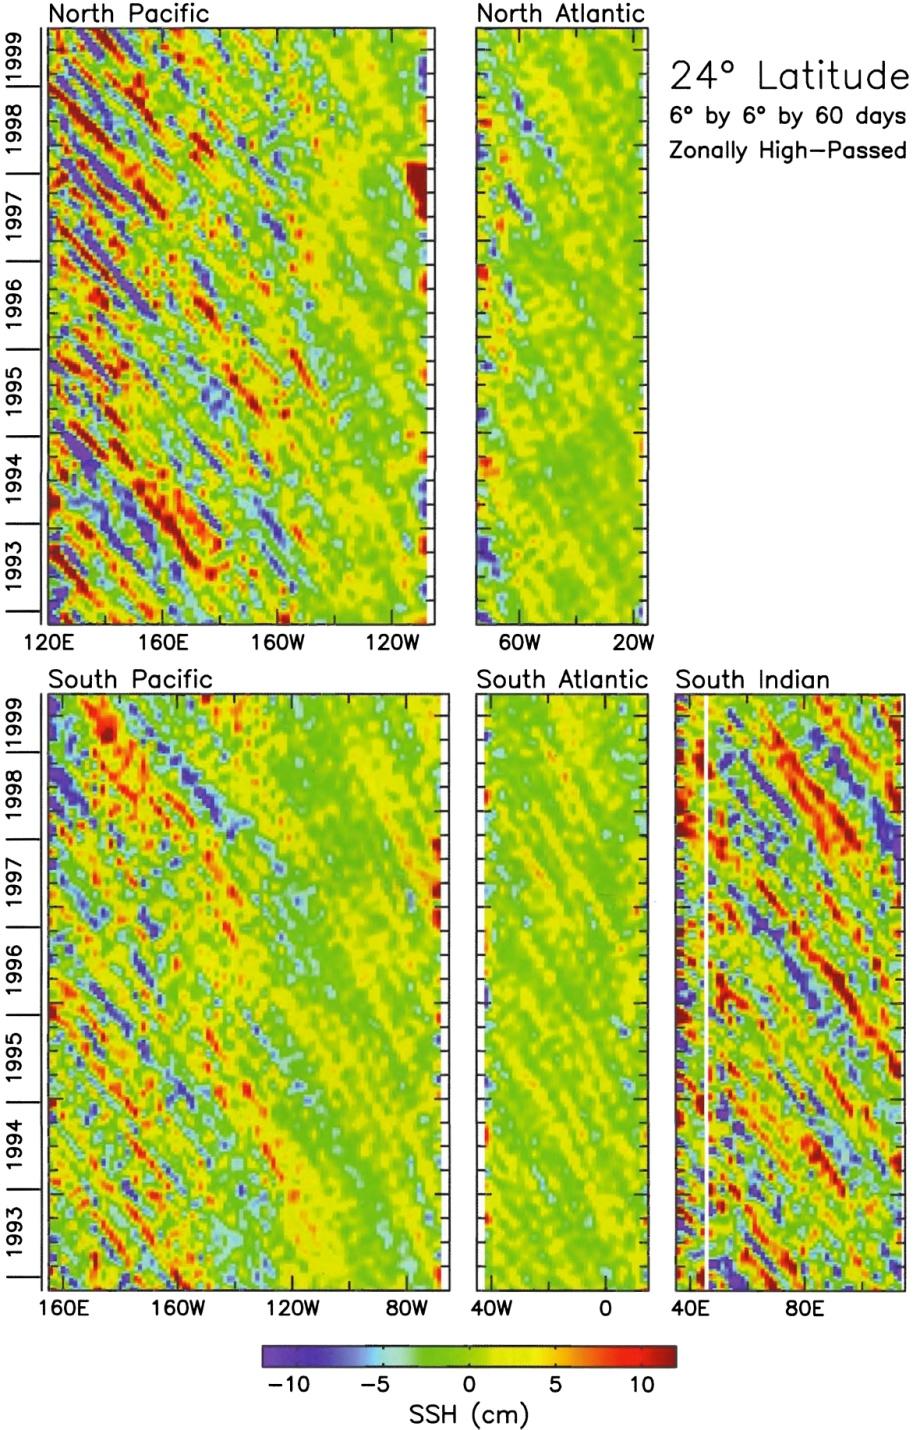 Rossby waves: westward propagating mesoscale disturbances These waves result from the potential vorticity balances that include the β- effect (variation of f with latitude) DPO Figure